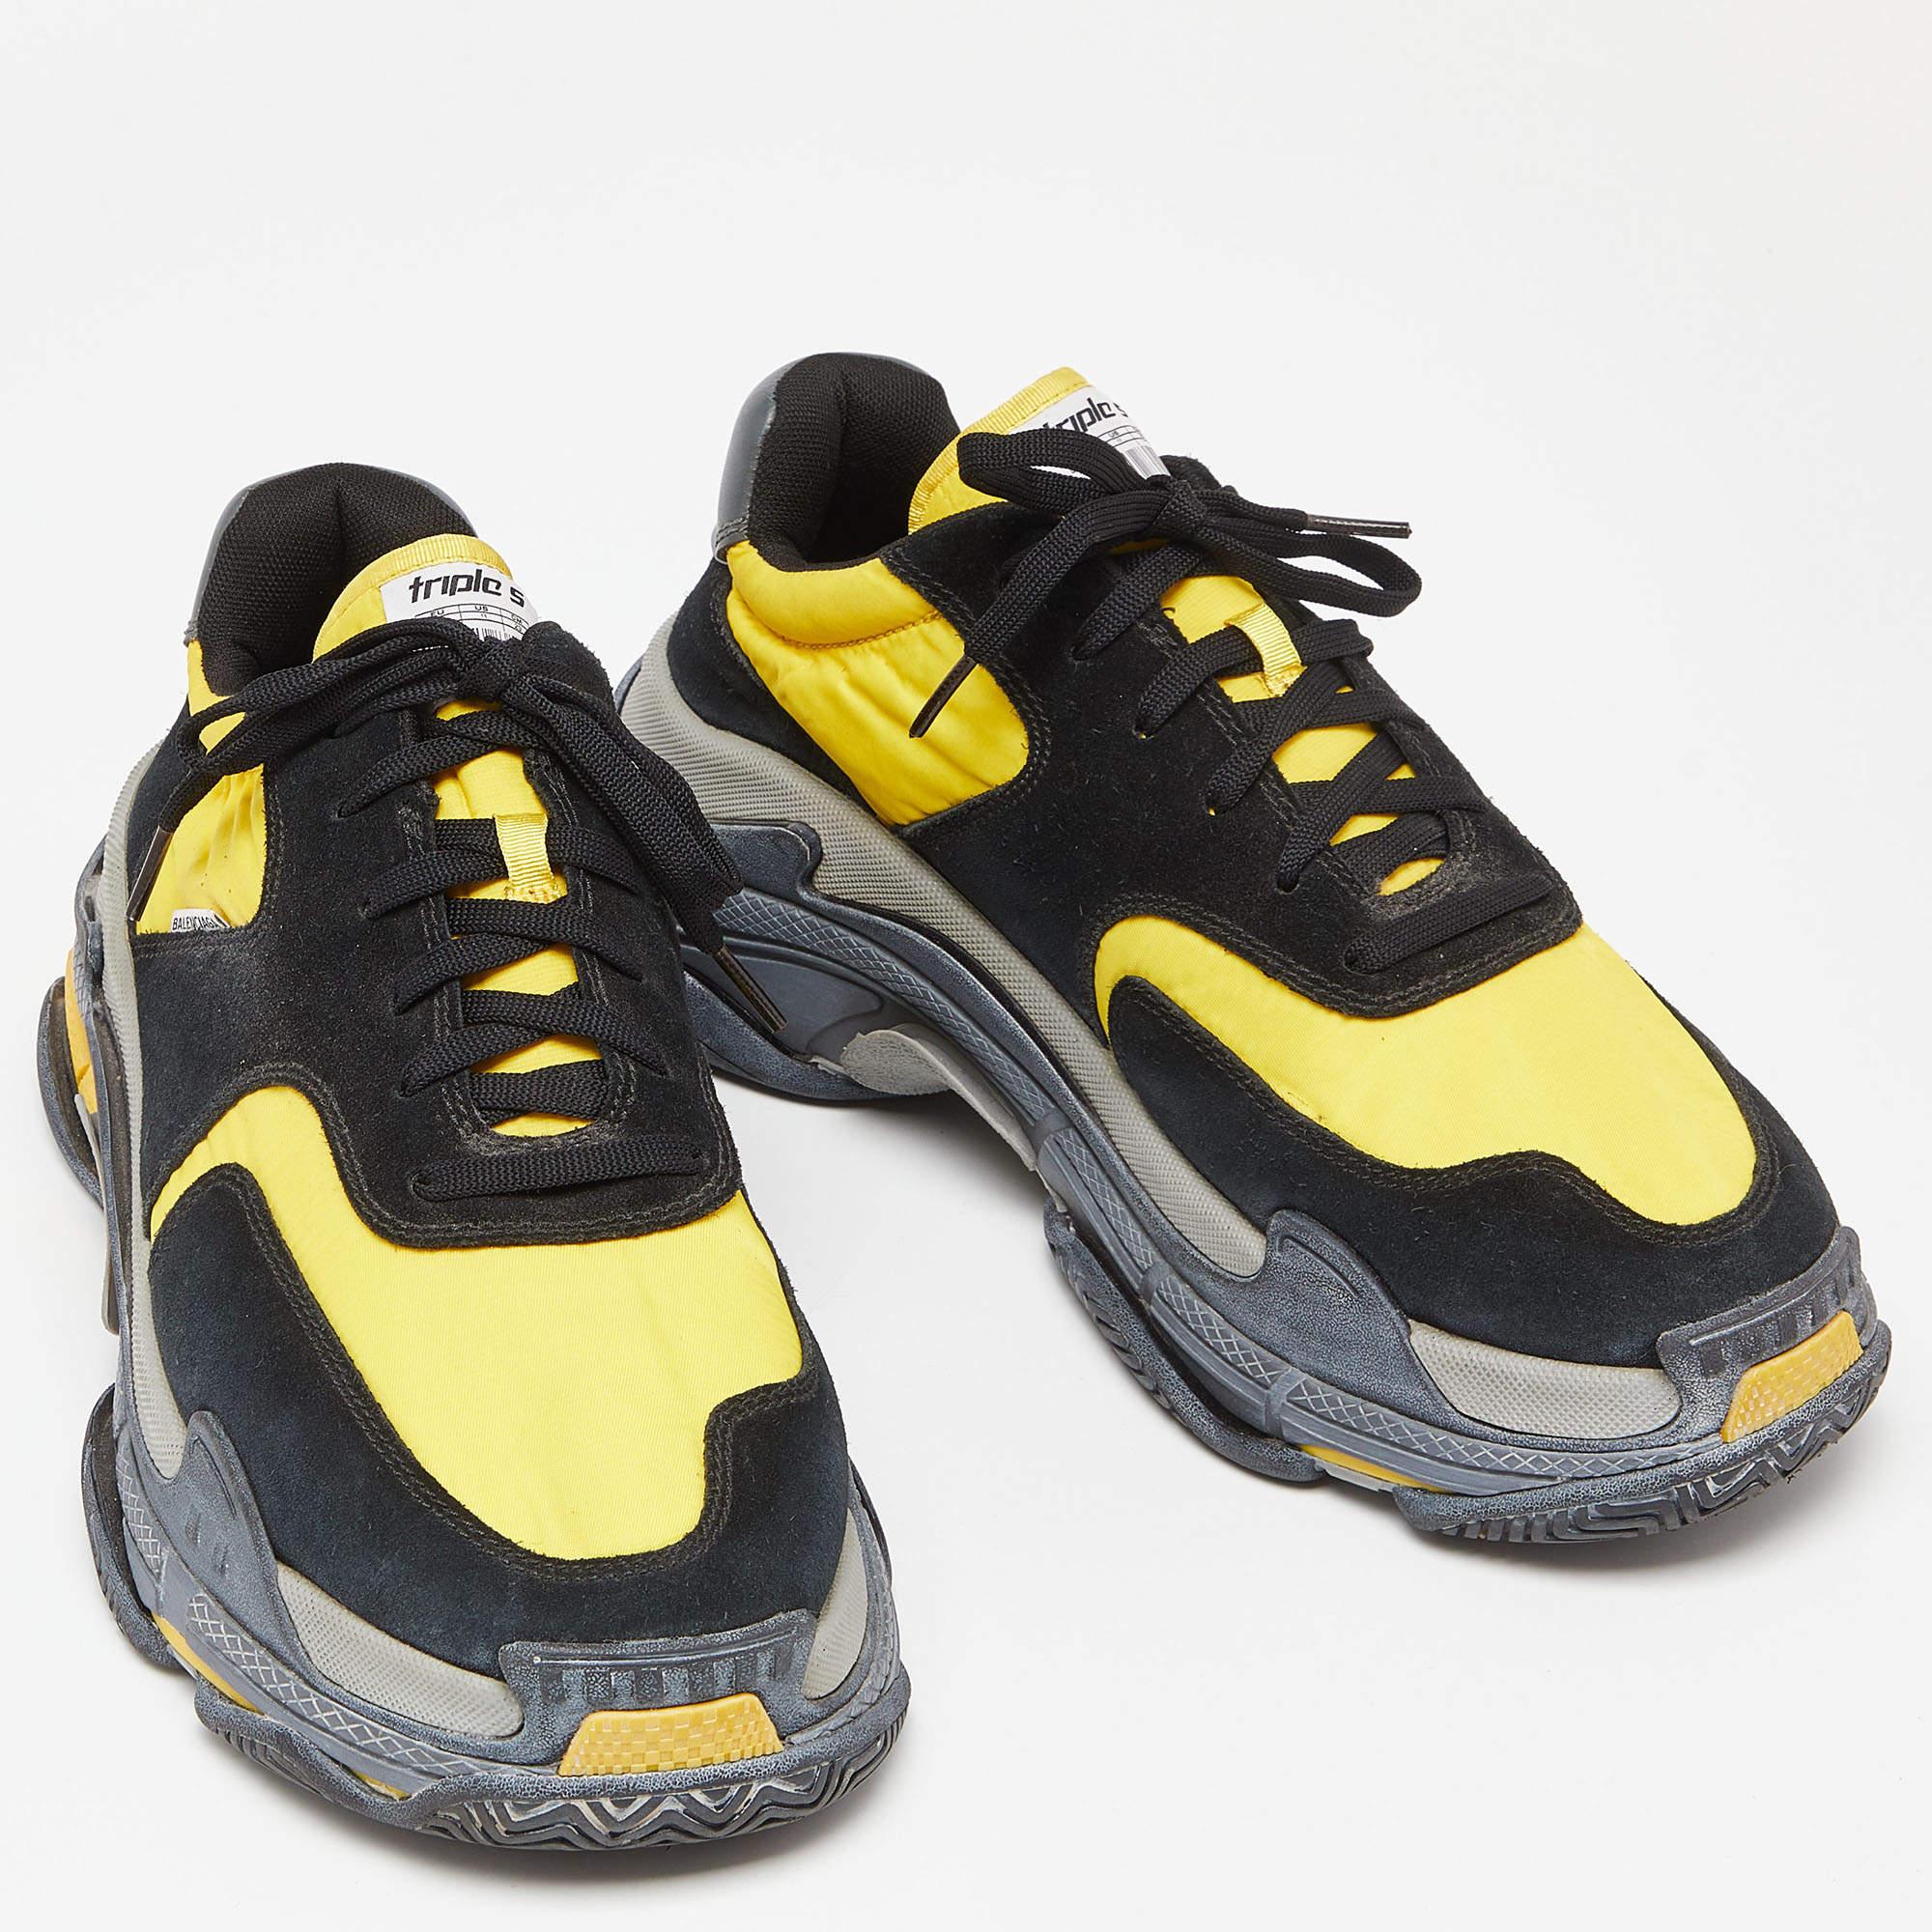 Men's Balenciaga Black/Yellow Suede and Nylon Triple S Sneakers Size 44 For Sale